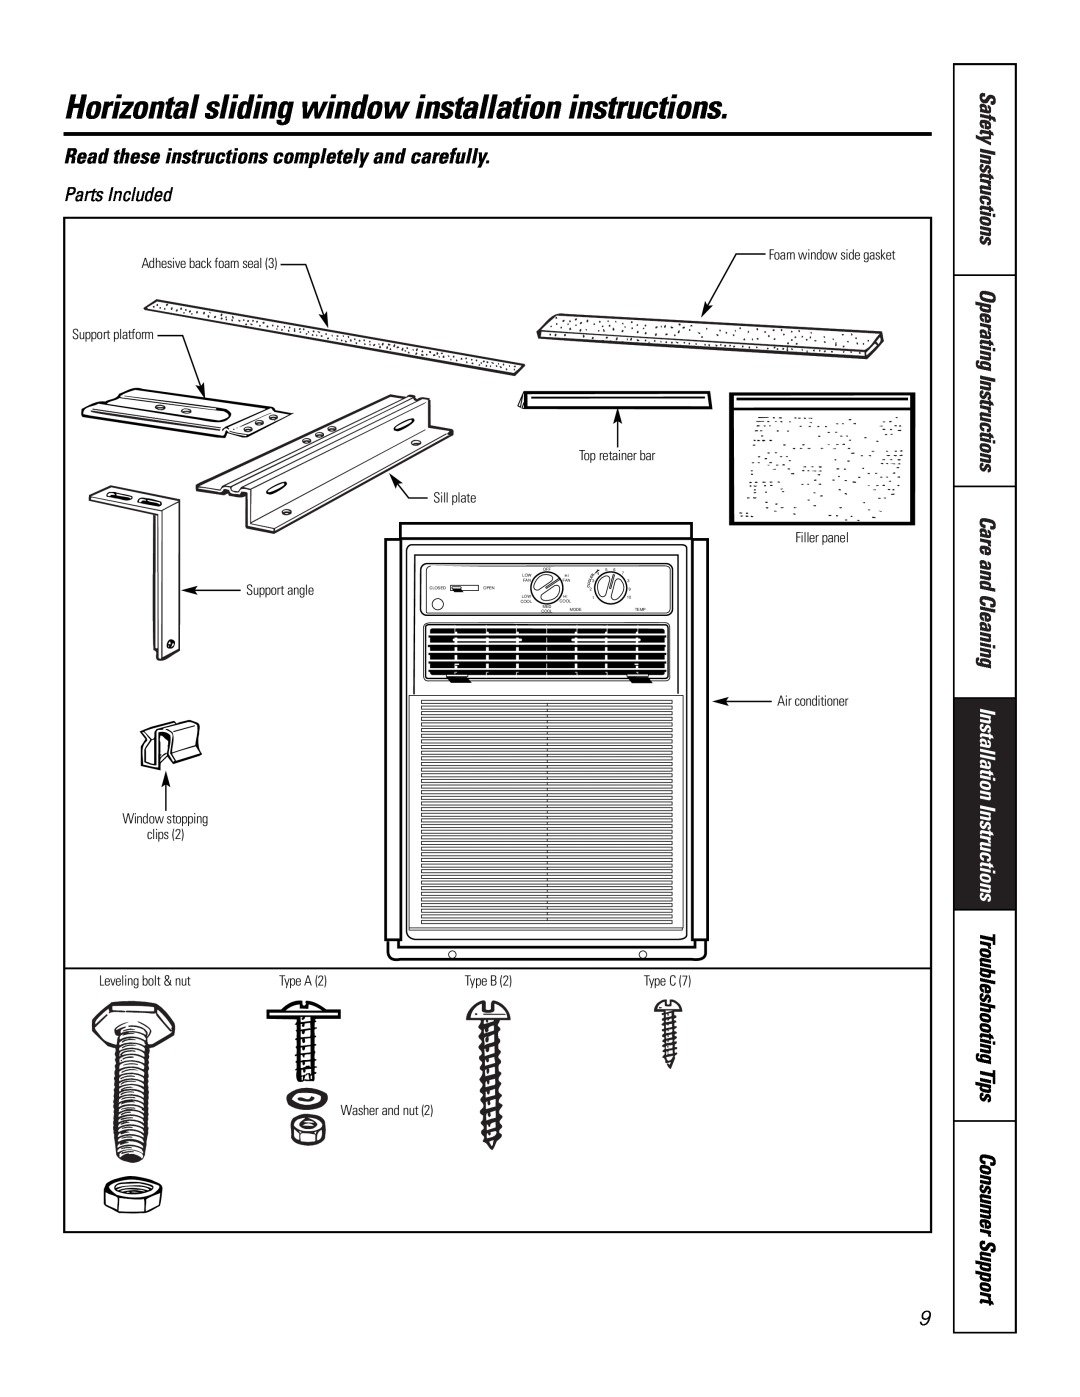 GE AVX10 Operating Instructions Care and Cleaning, Read these instructions completely and carefully, Safety Instructions 